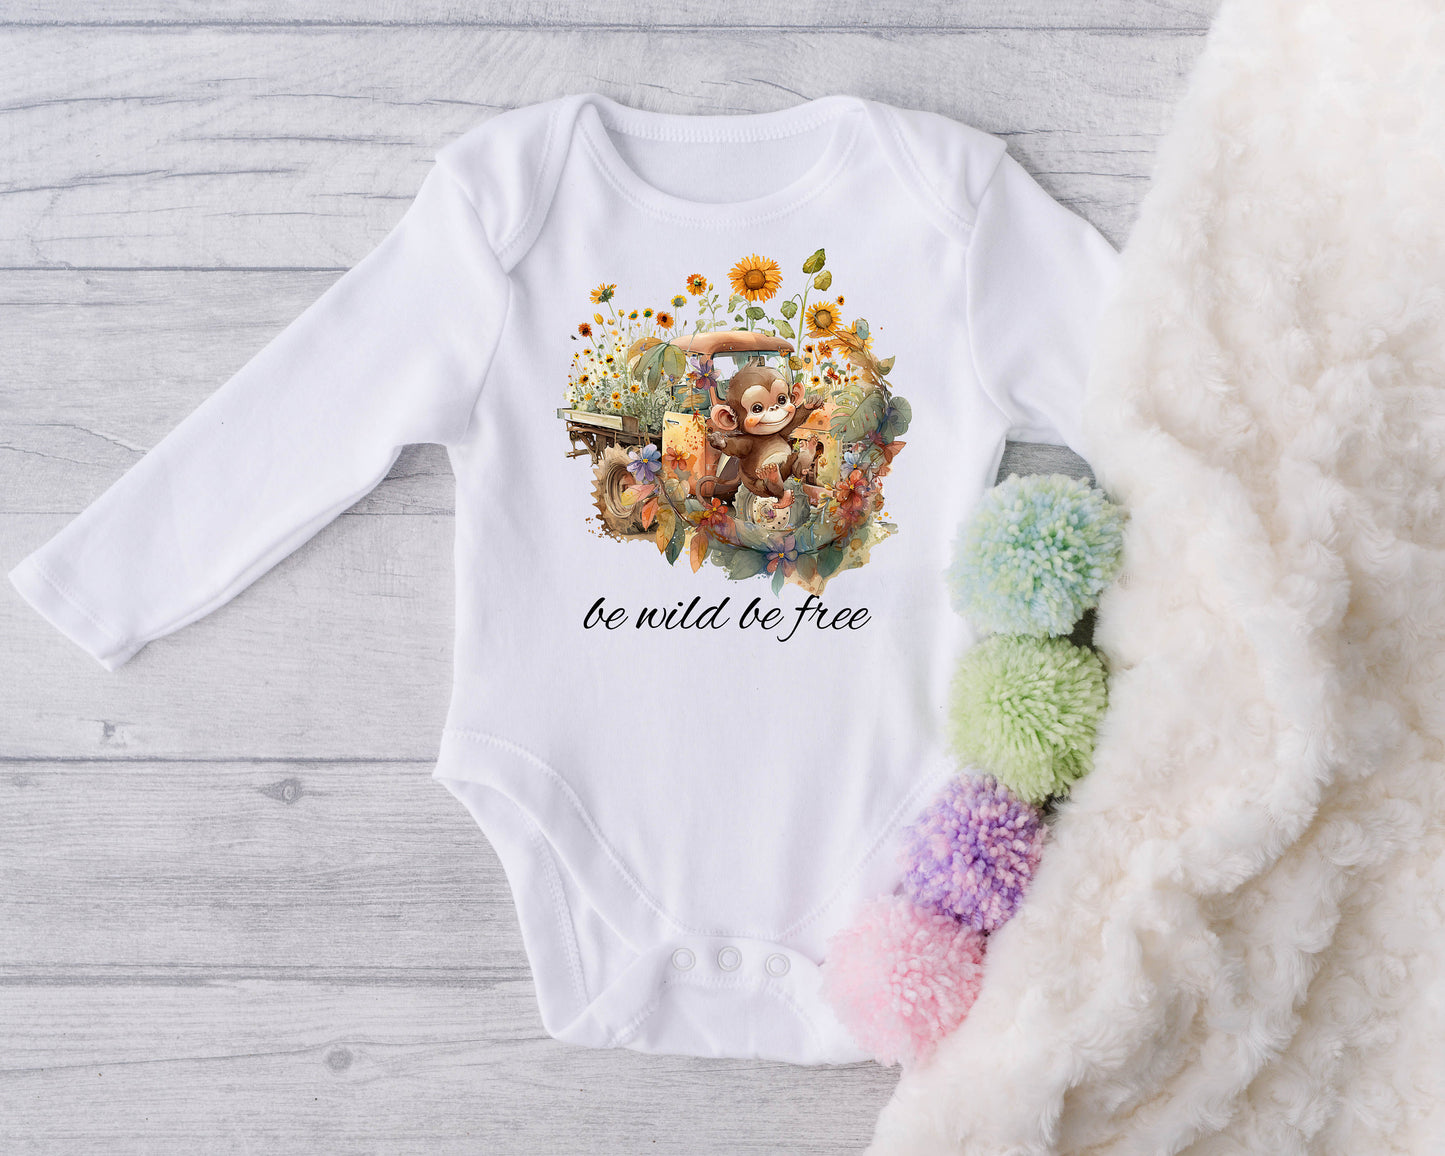 New Release, Baby Bodysuit, Be Wild Be Free Romper, One Piece Baby Suit, Baby Gift, Long / Short Sleeve, 0-18 Months size